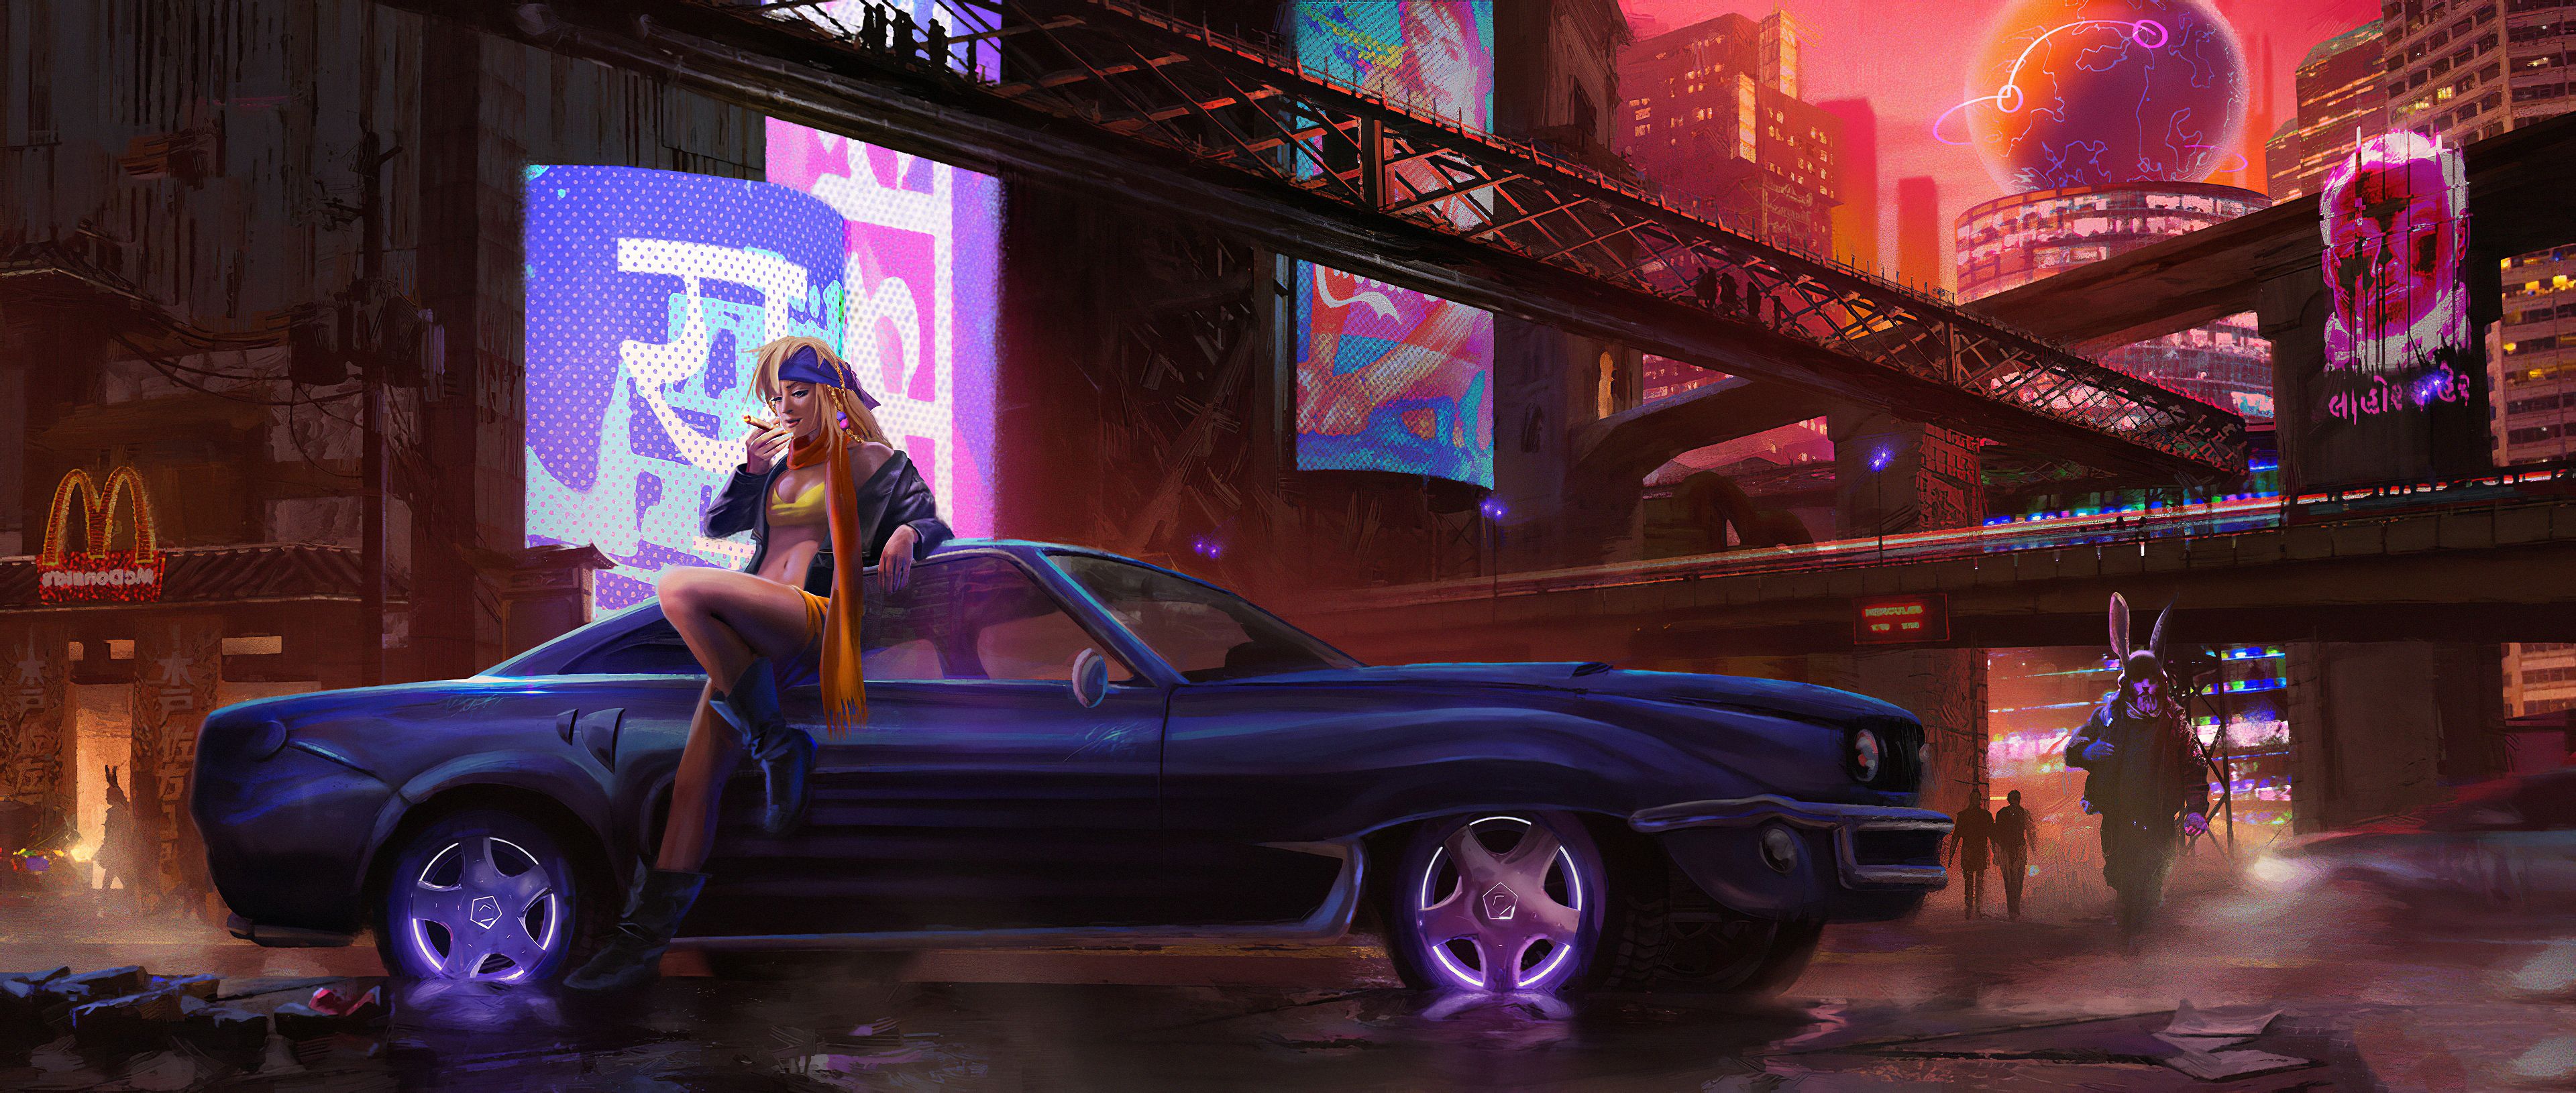 Cyber City Girl With Car, HD Artist, 4k Wallpaper, Image, Background, Photo and Picture